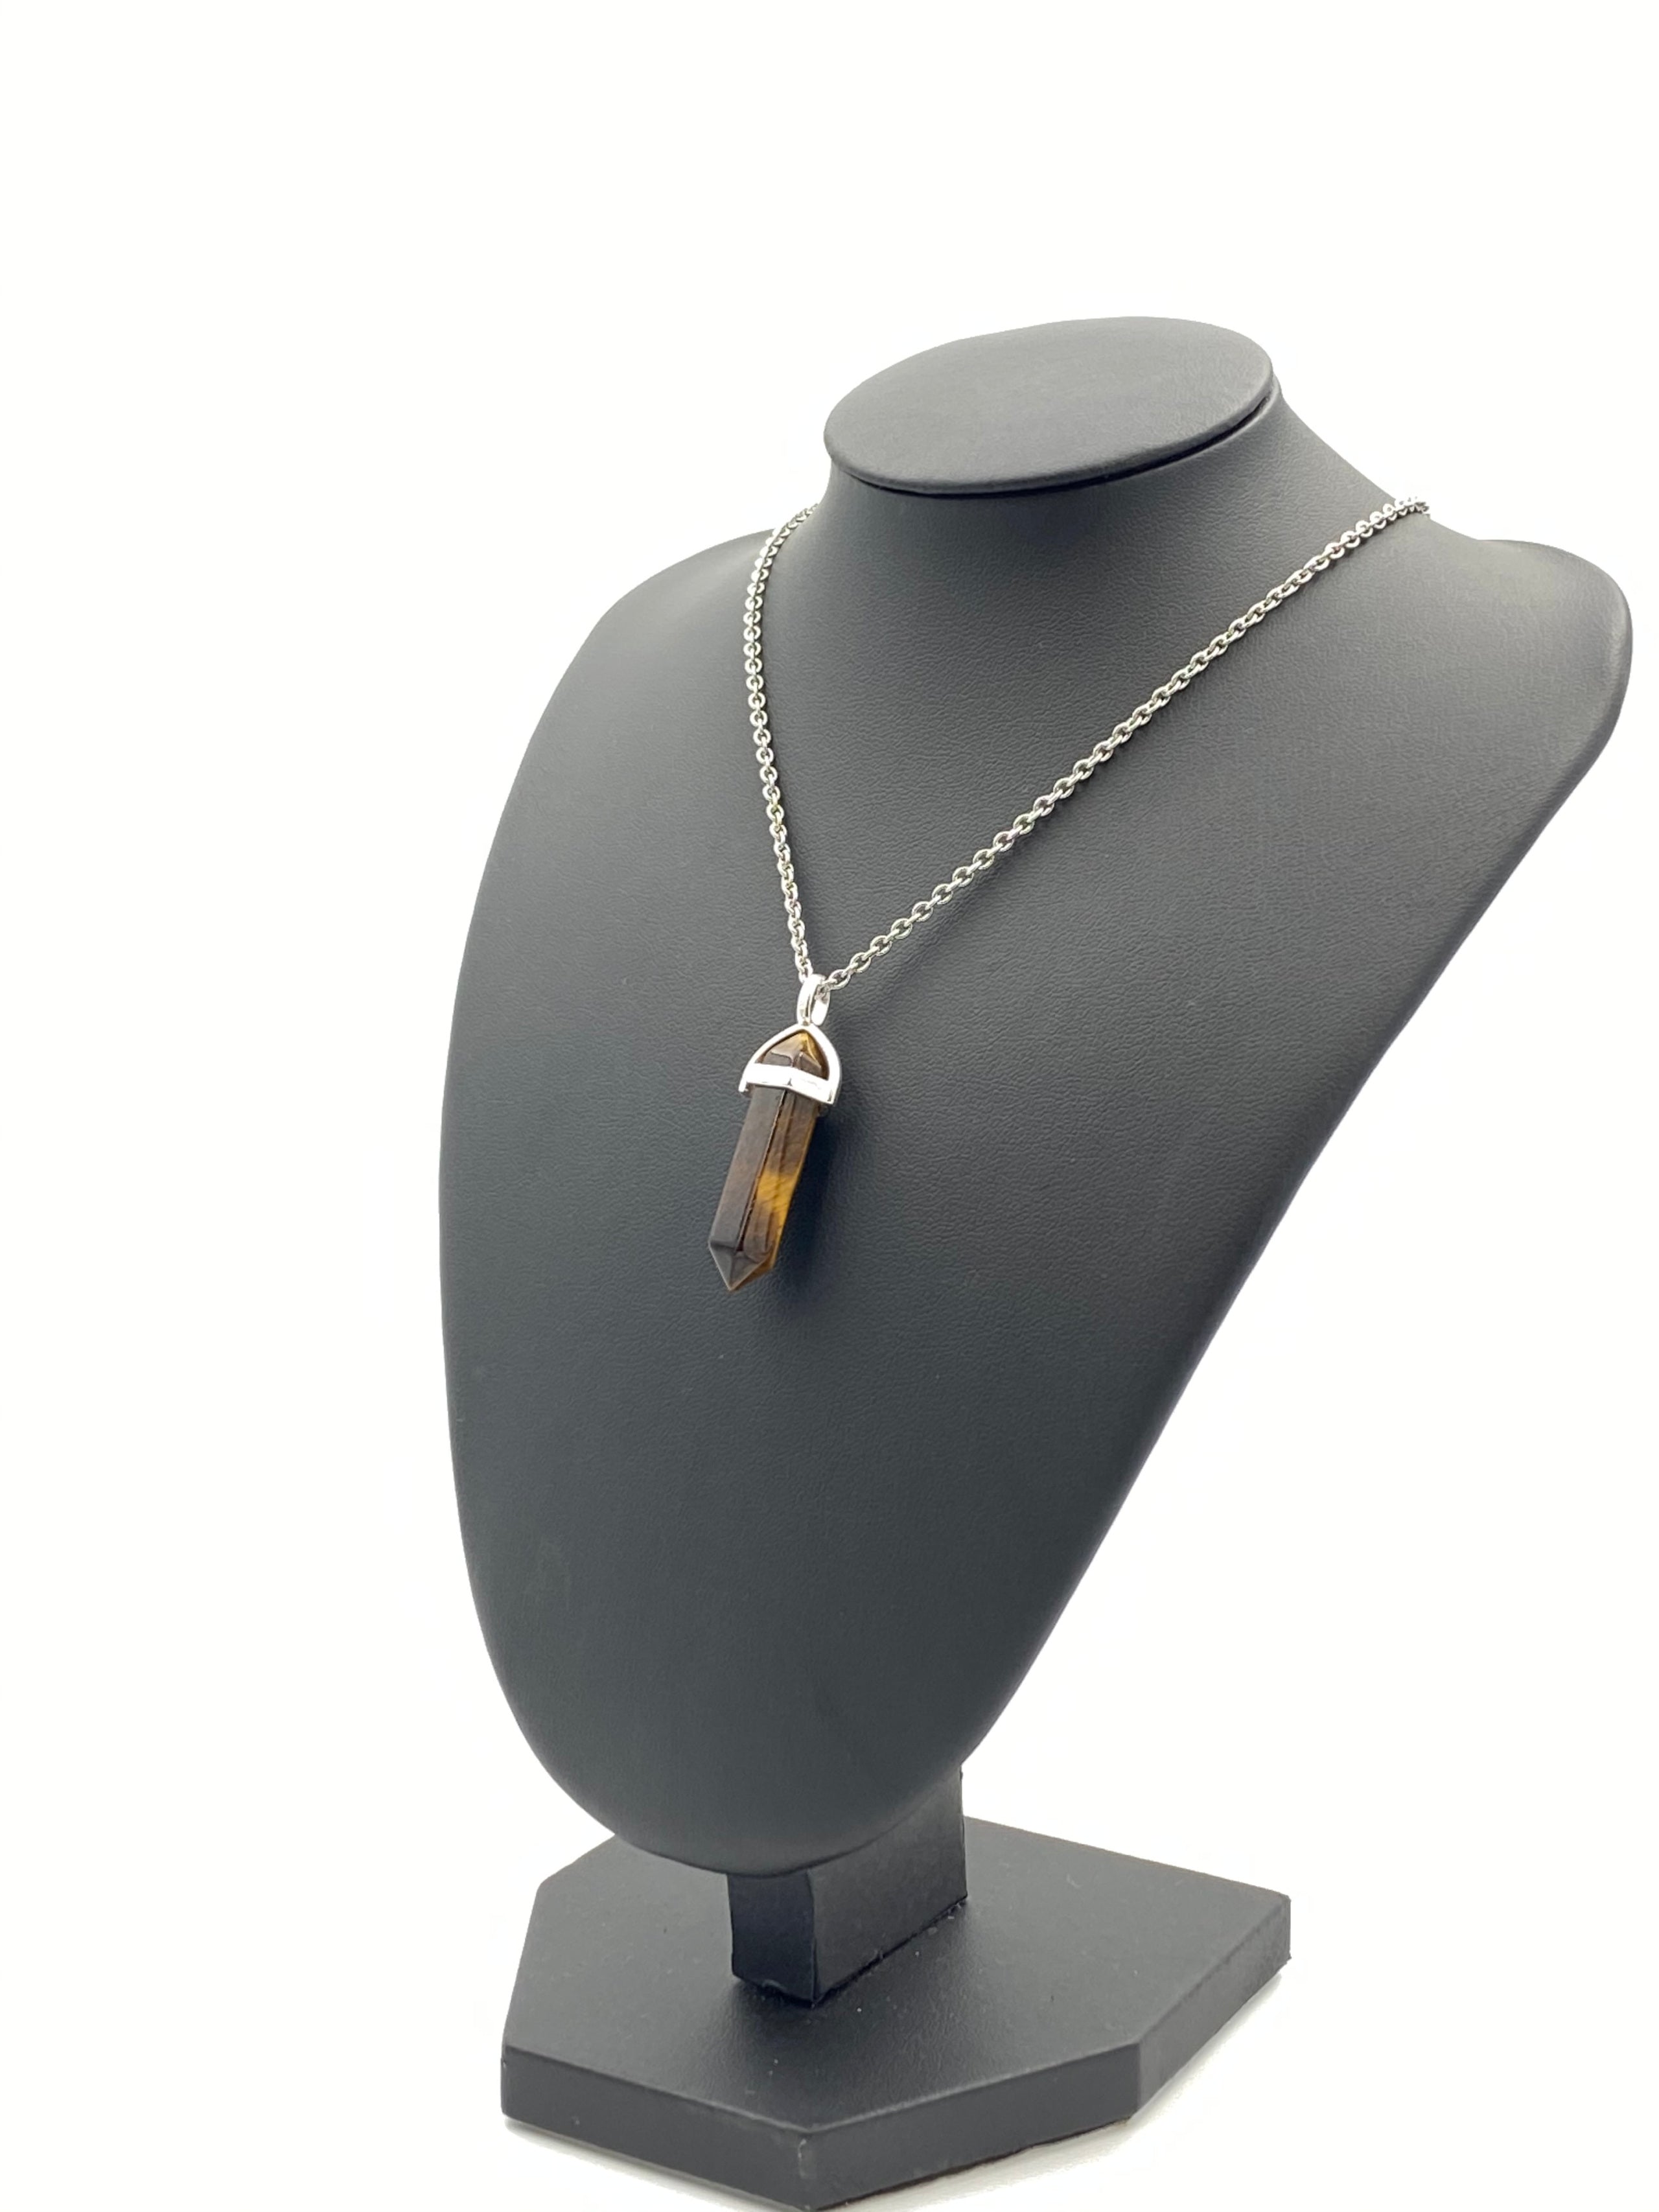 Gold Tigers Eye 925 Sterling Silver Pendant